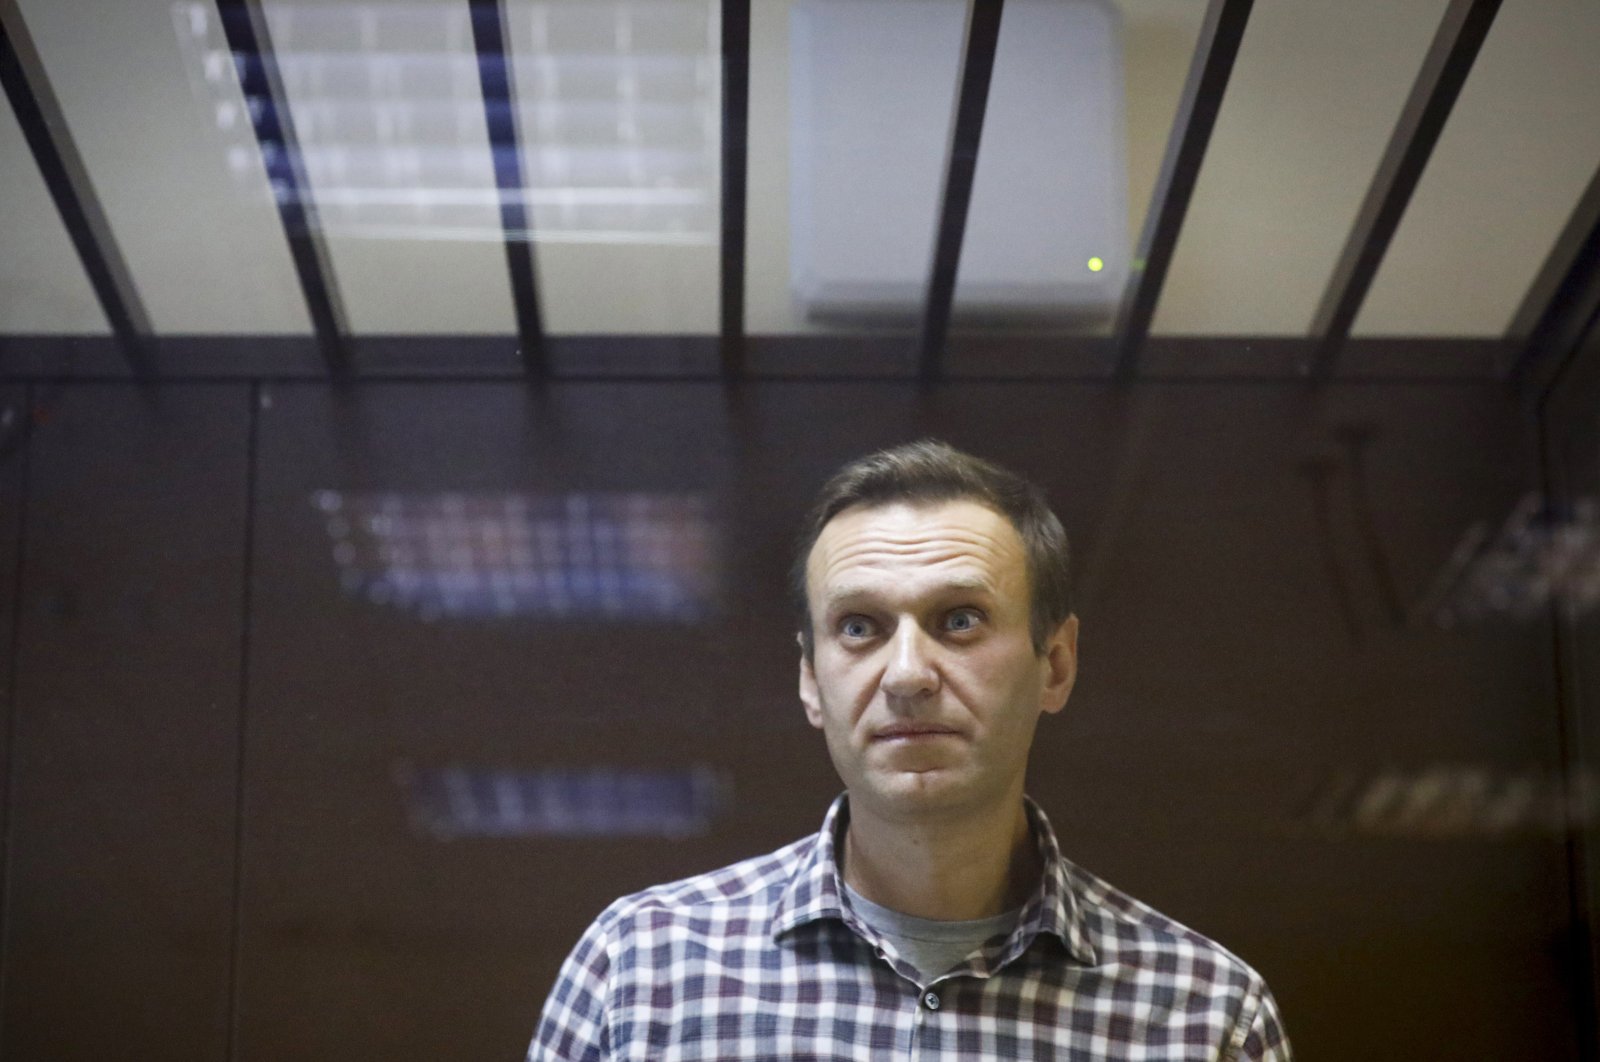 Russian opposition leader Alexei Navalny stands in a cage in the Babuskinsky District Court in Moscow, Russia, Feb. 20, 2021. (AP Photo/File)